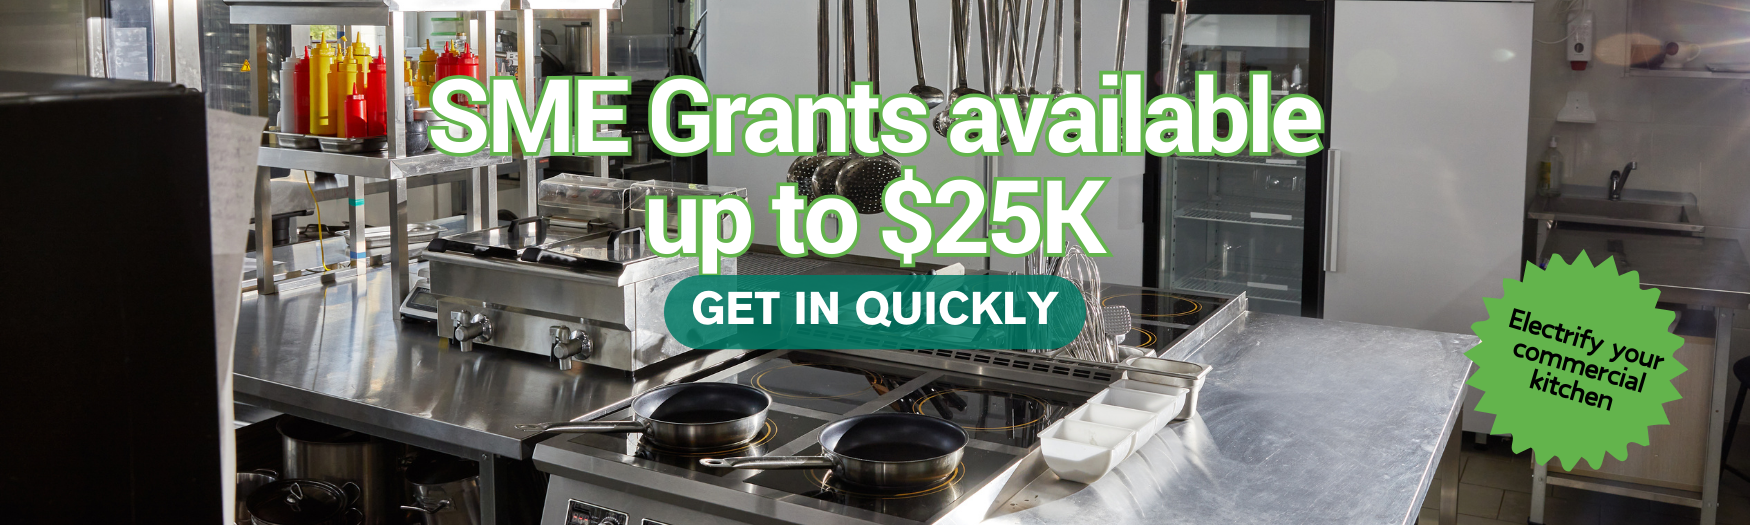 SME grants available.